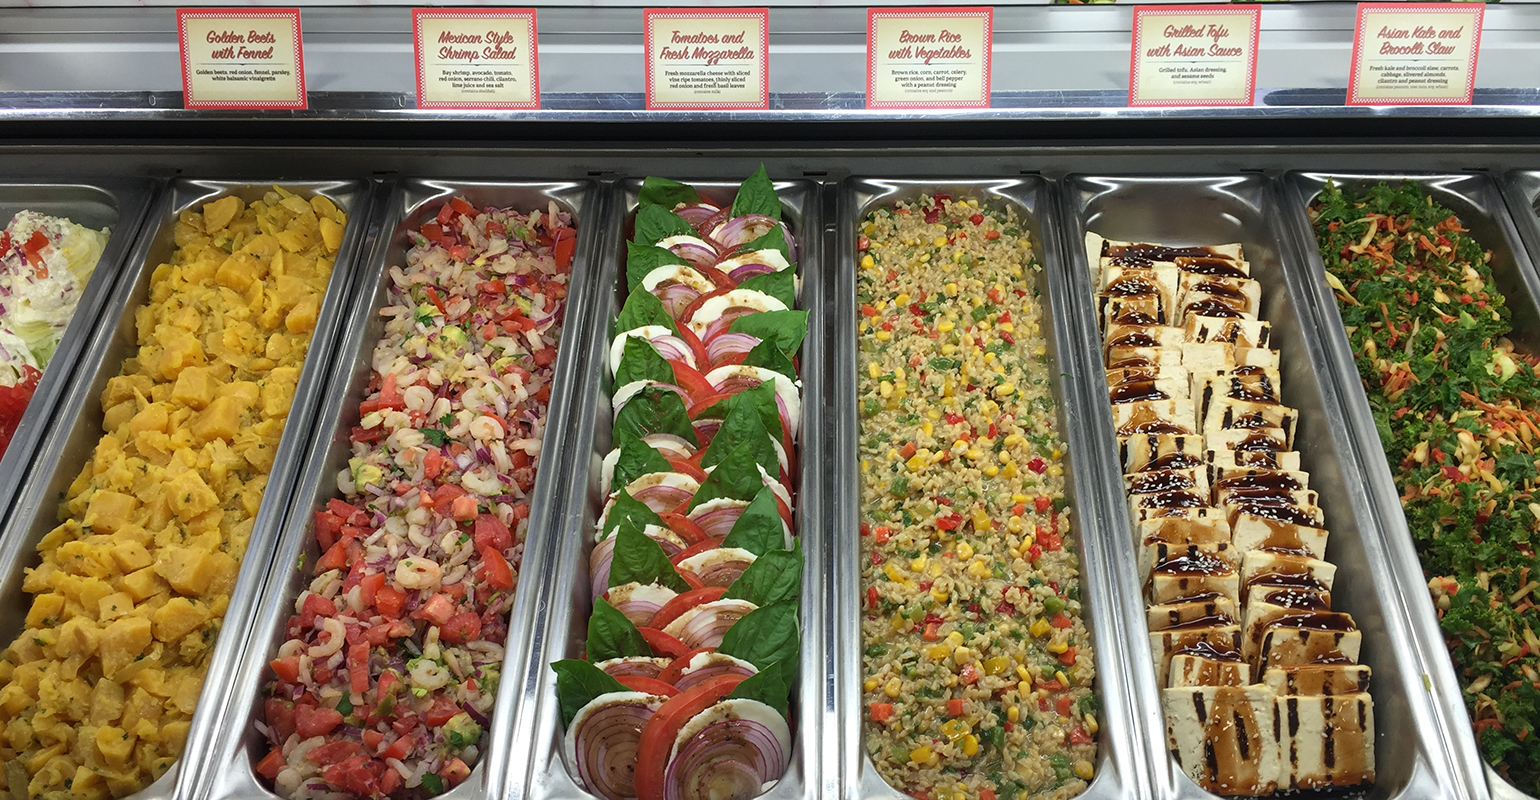 Industry experts assess Sprouts' upgraded deli offering